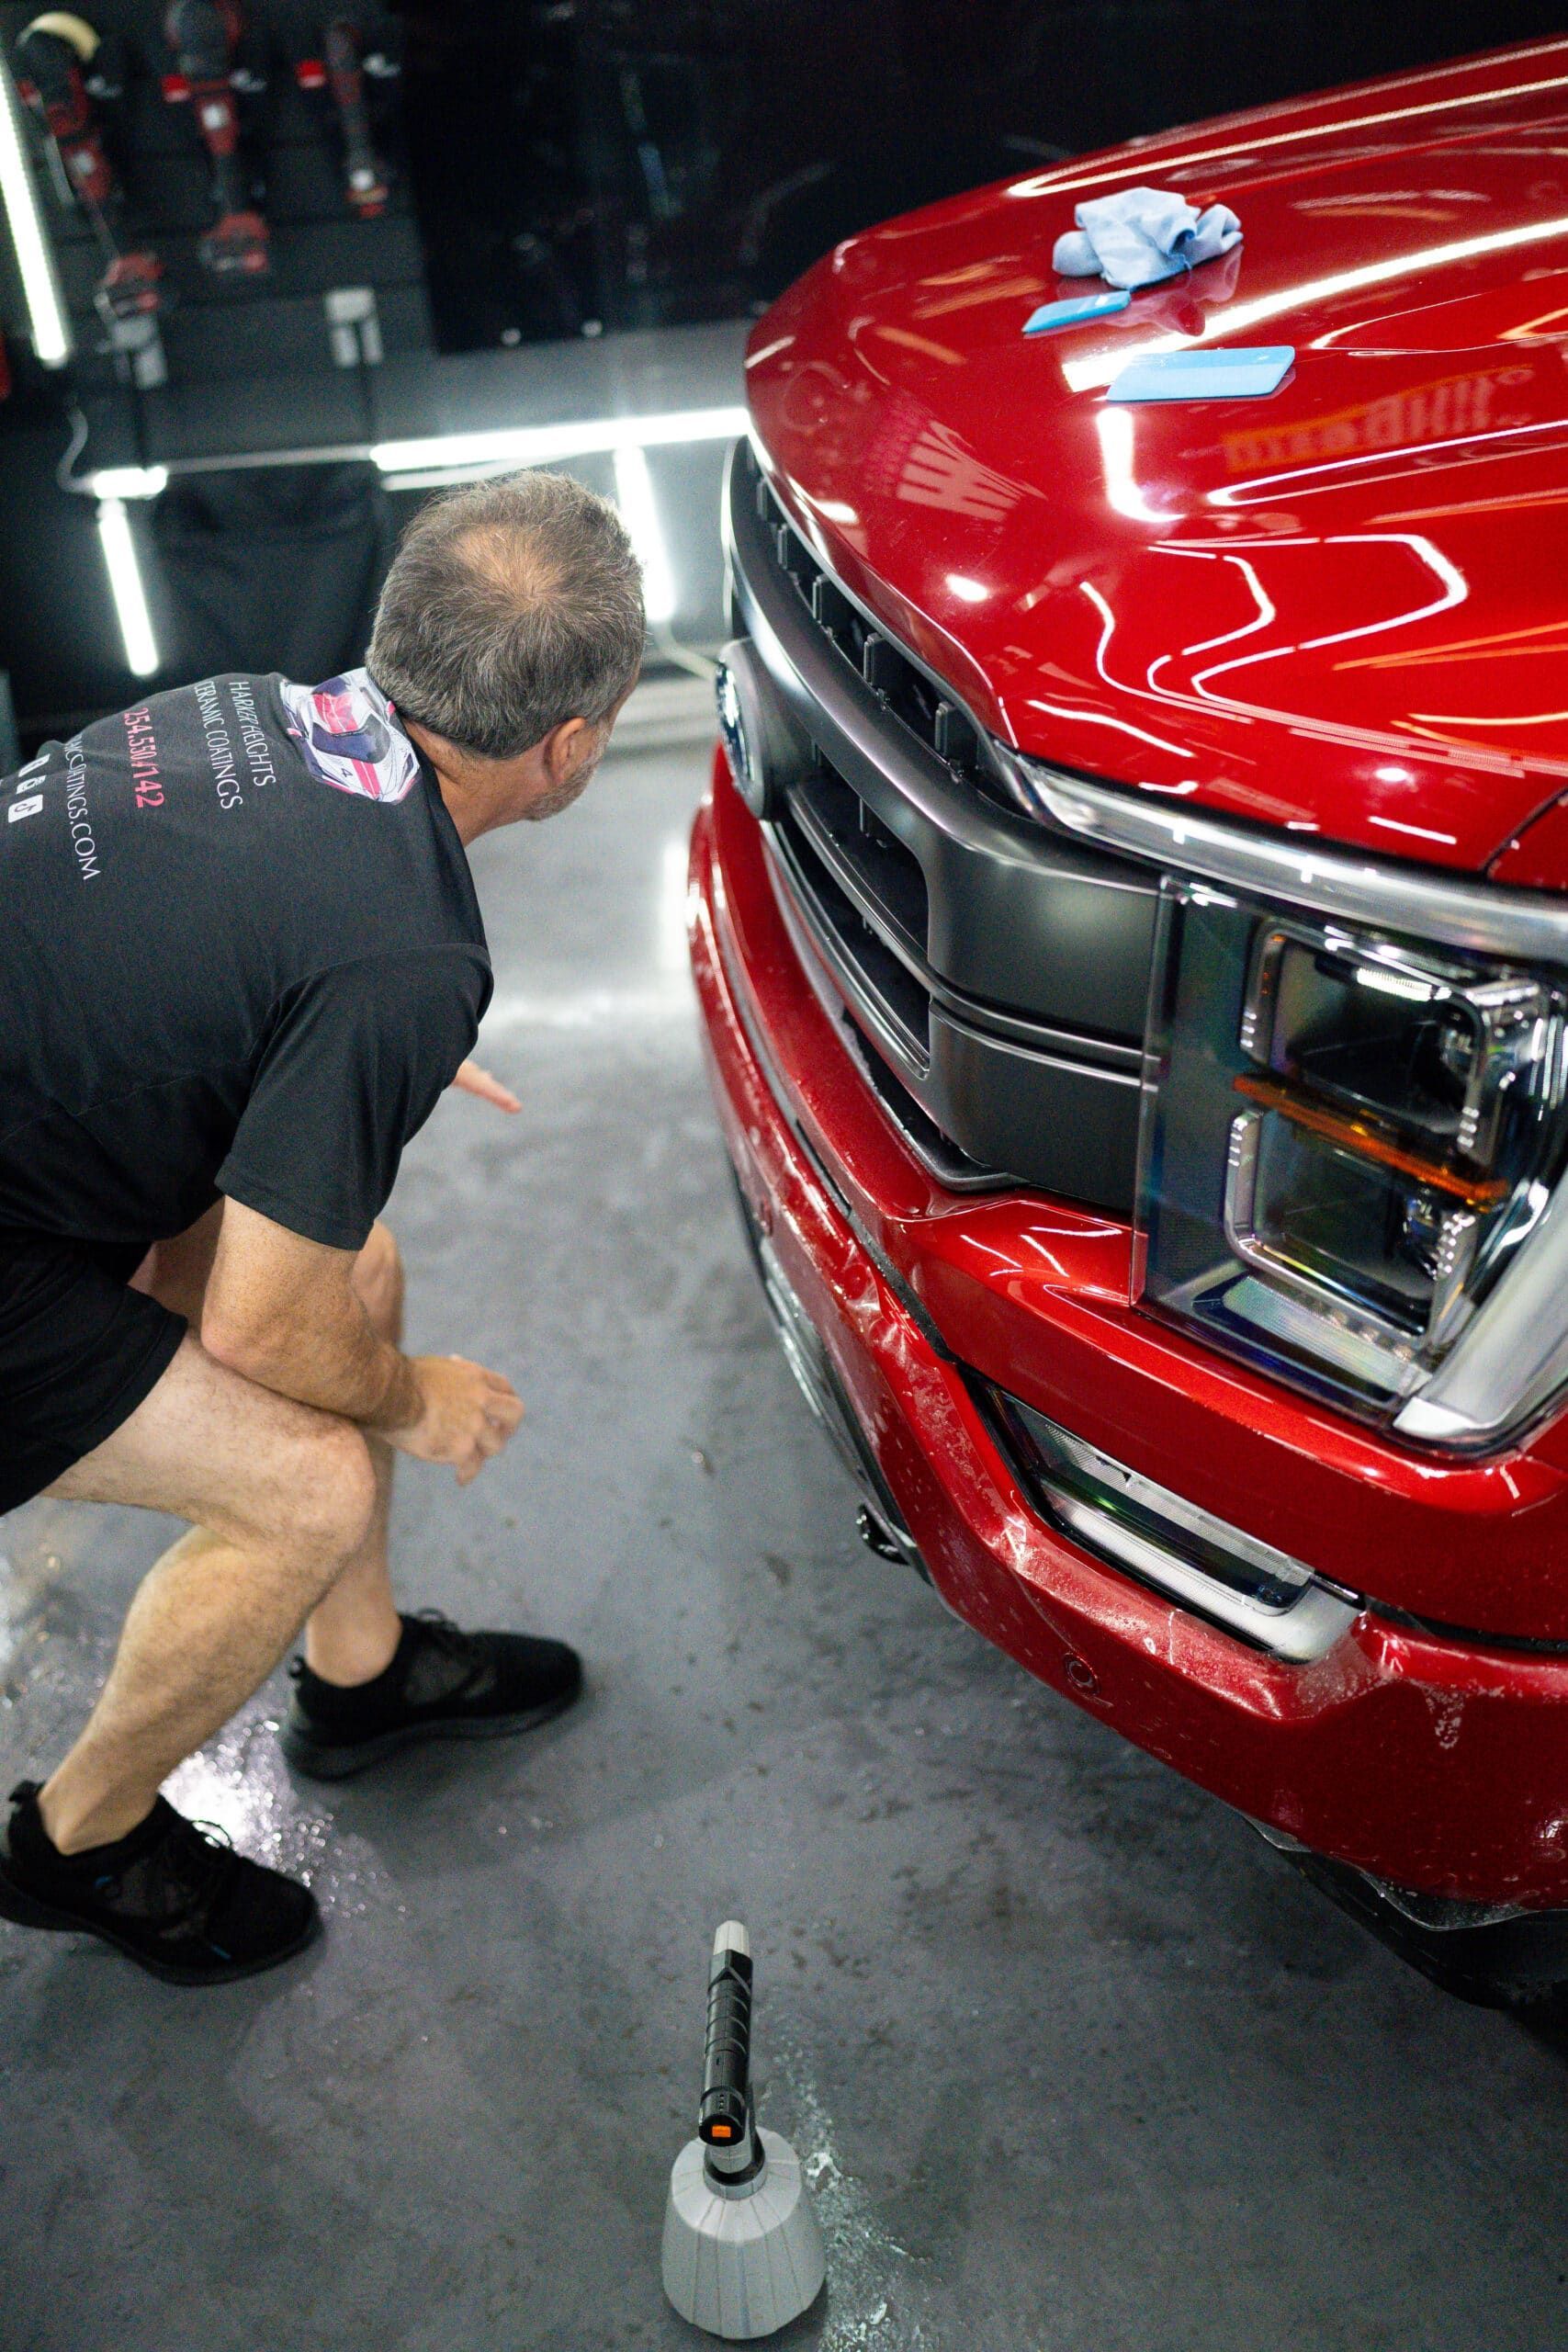 A man is kneeling down in front of a red truck.